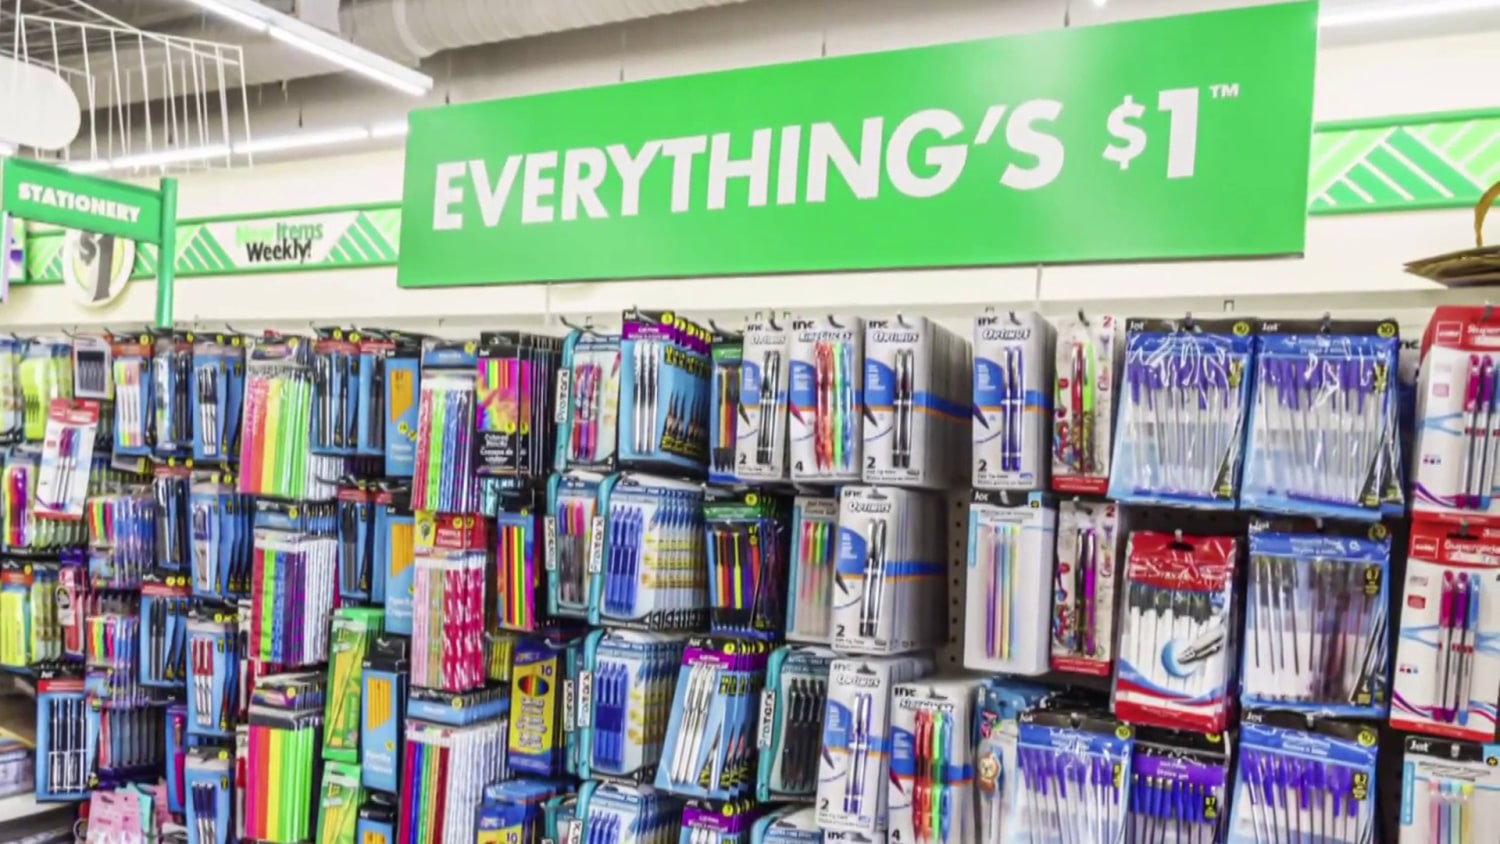 Dollar Tree unveils six new items under $1.25 in time for back to school -  including top-rated product with so many uses